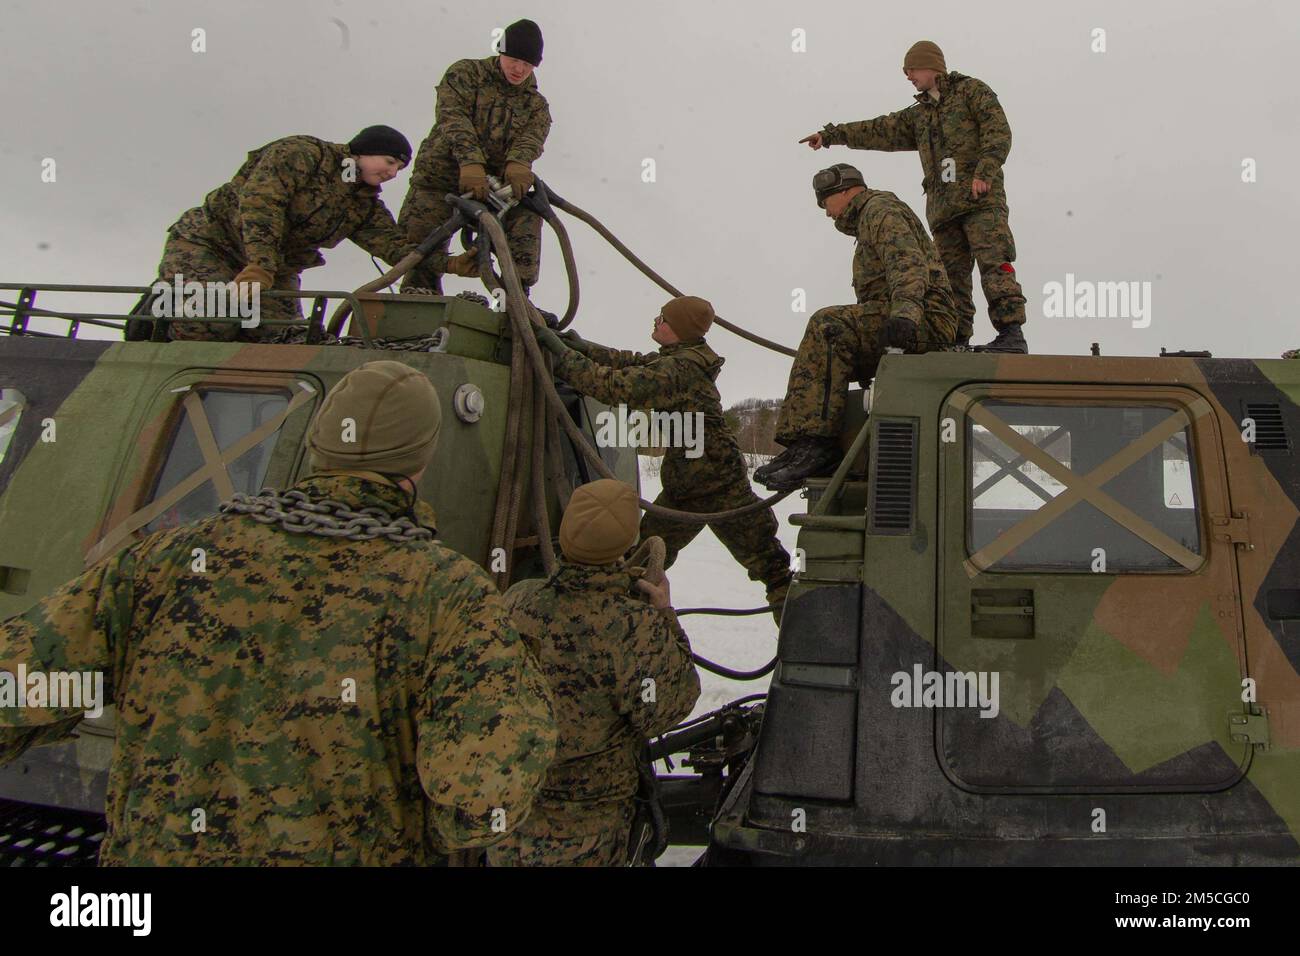 U.S. Marines with 2nd Landing Support Battalion, attached to 3rd Battalion, 6th Marine Regiment, II Marine Expeditionary Force,  prepare a Norwegian Bandvagn 206 to be lifted in preparation for Exercise Cold Response 2022, Bardufoss, Norway, Feb. 28, 2022. Exercise Cold Response '22 is a biennial Norwegian national readiness and defense exercise that takes place across Norway, with participation from each of its military services, as well as from 26 additional North Atlantic Treaty Organization (NATO) allied nations and regional partners. Stock Photo